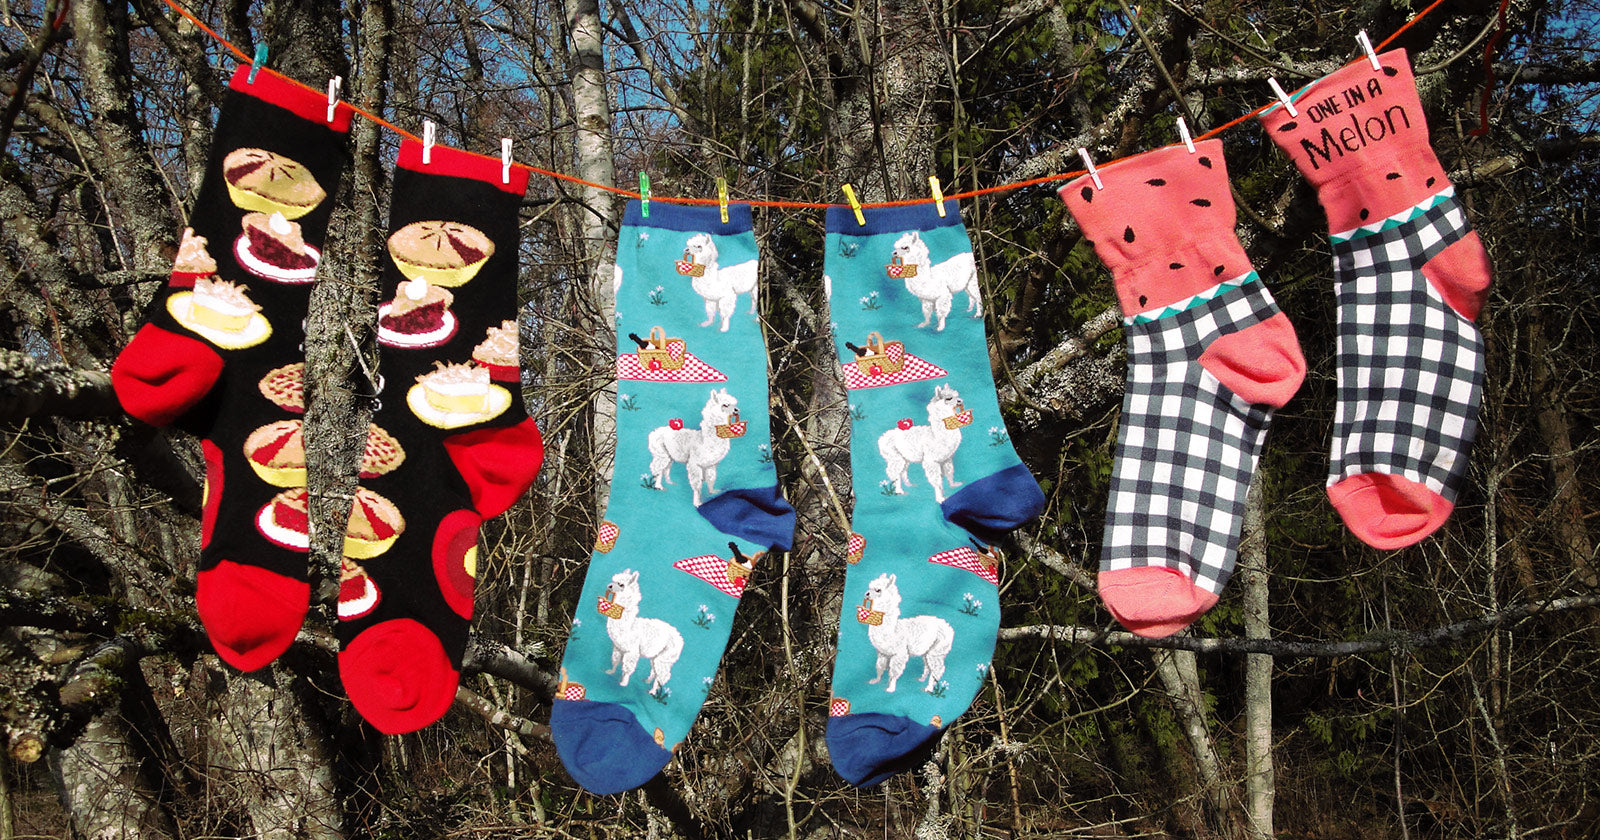 Novelty socks with patterns including food and animals hang on a clothesline to dry after being washed.